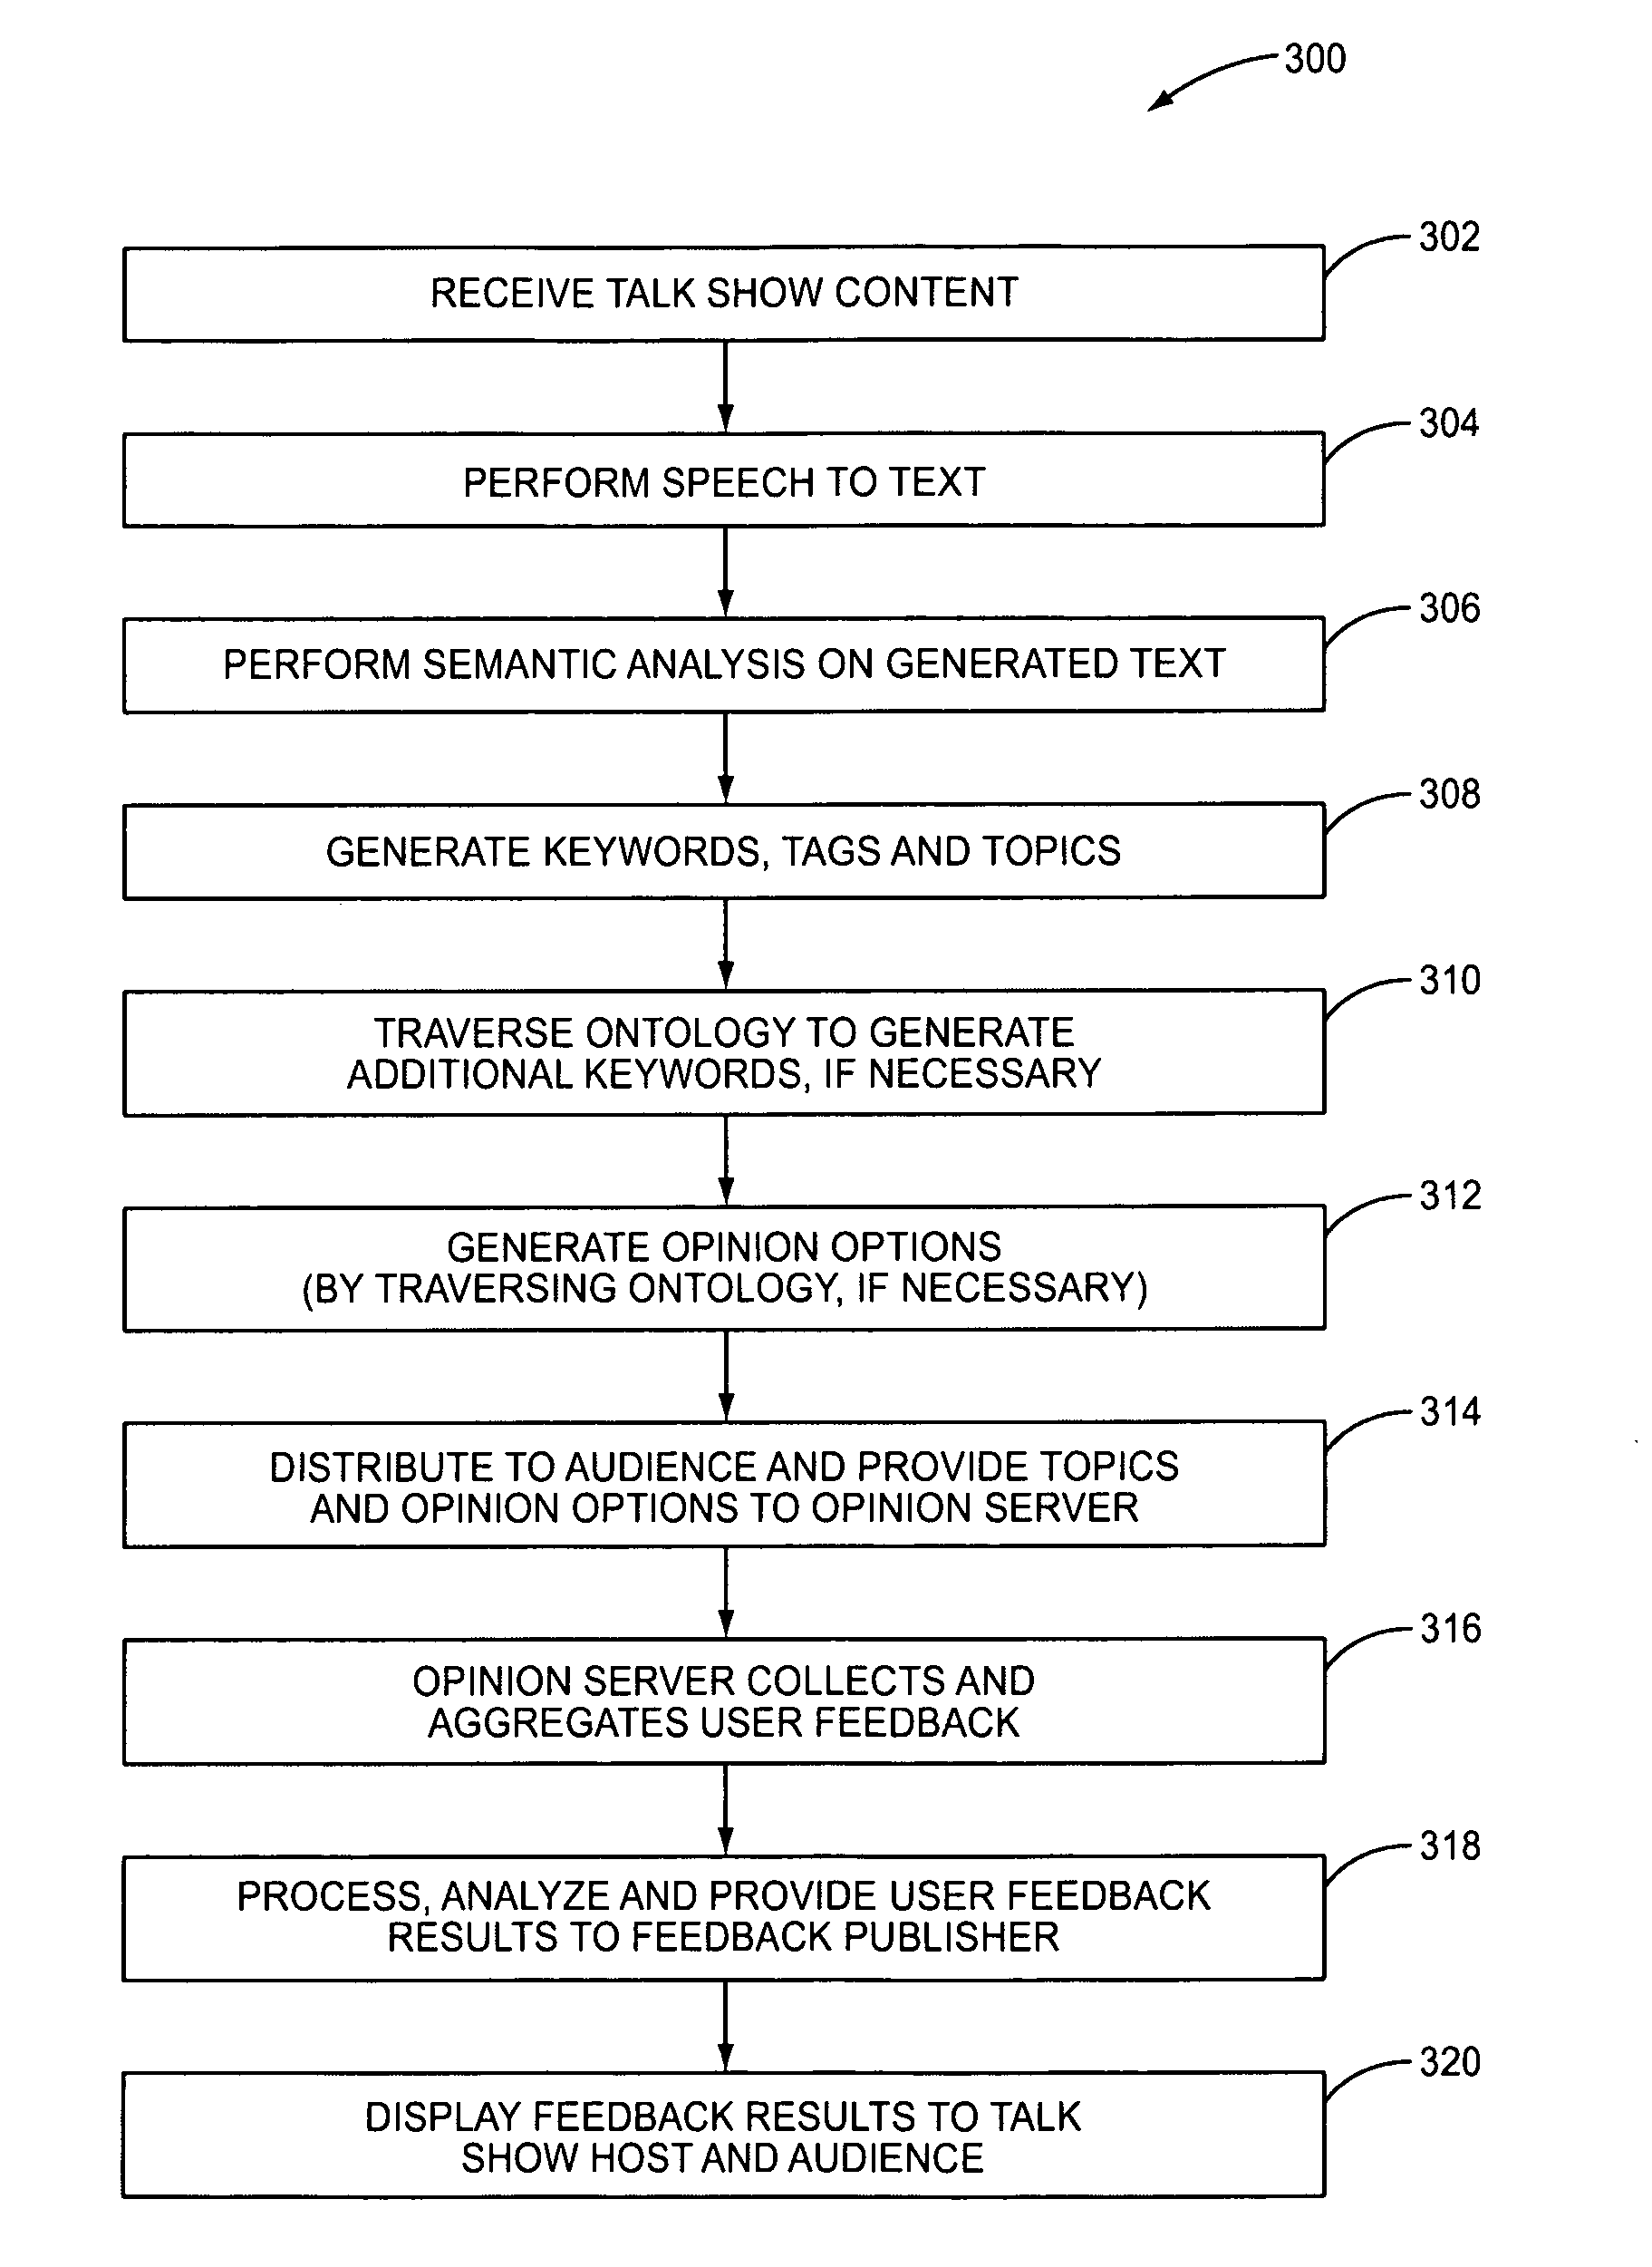 System and method for distributed audience feedback on semantic analysis of media content